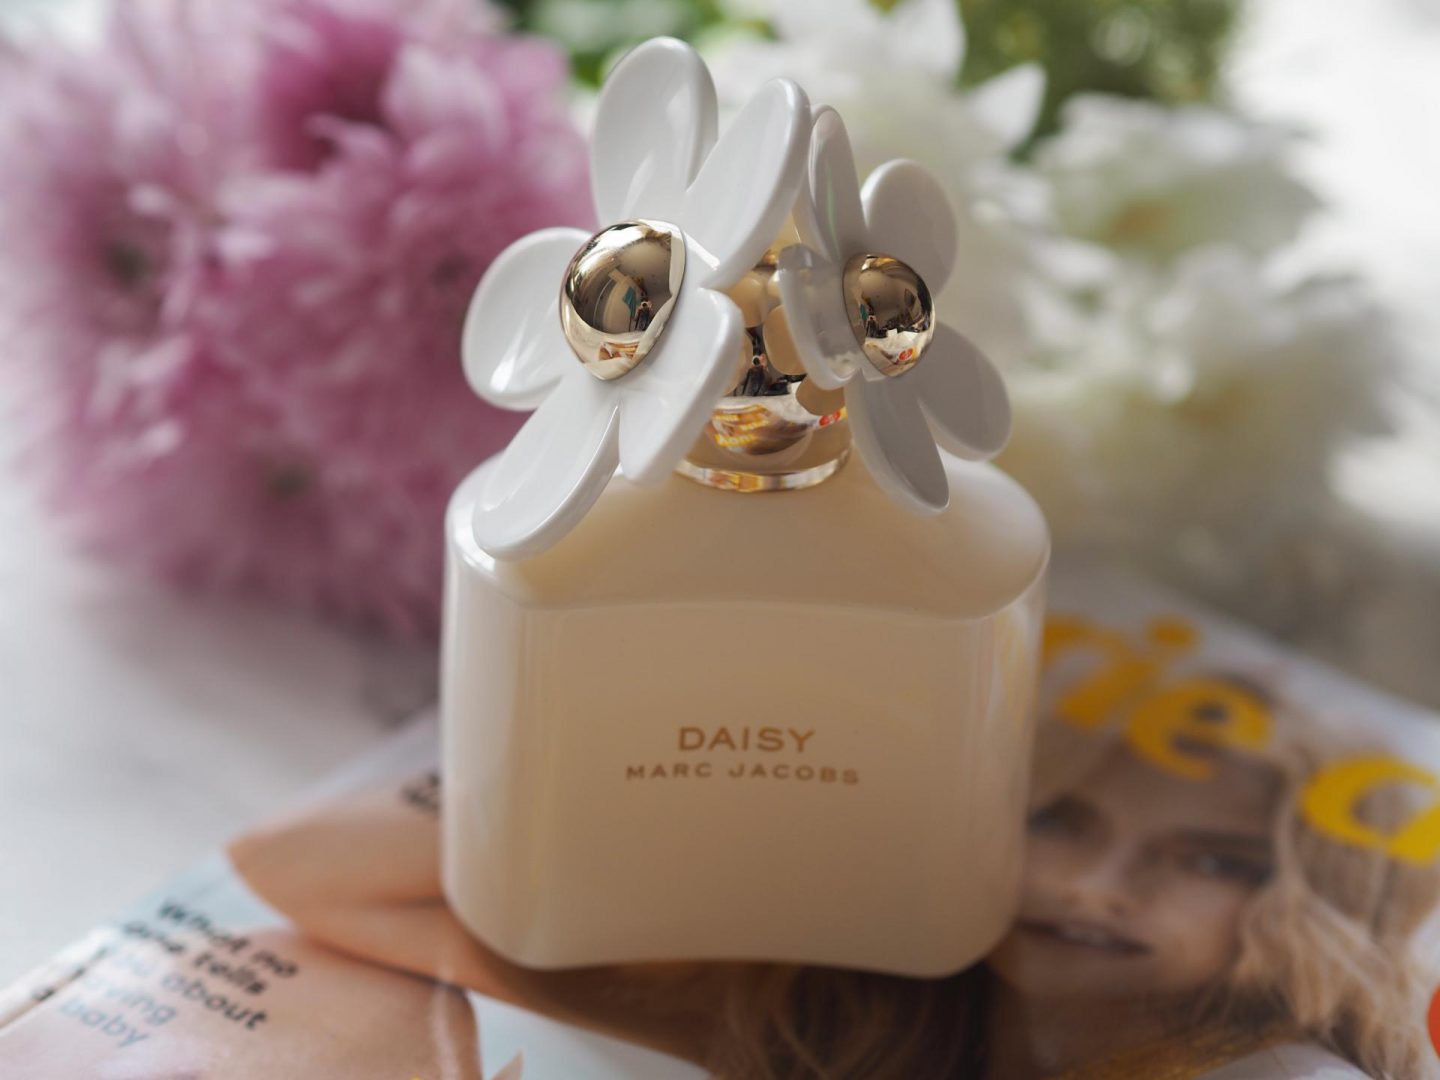 Fragrances For Women - Product: Daisy by Marc Jacobs (Limited Edition)